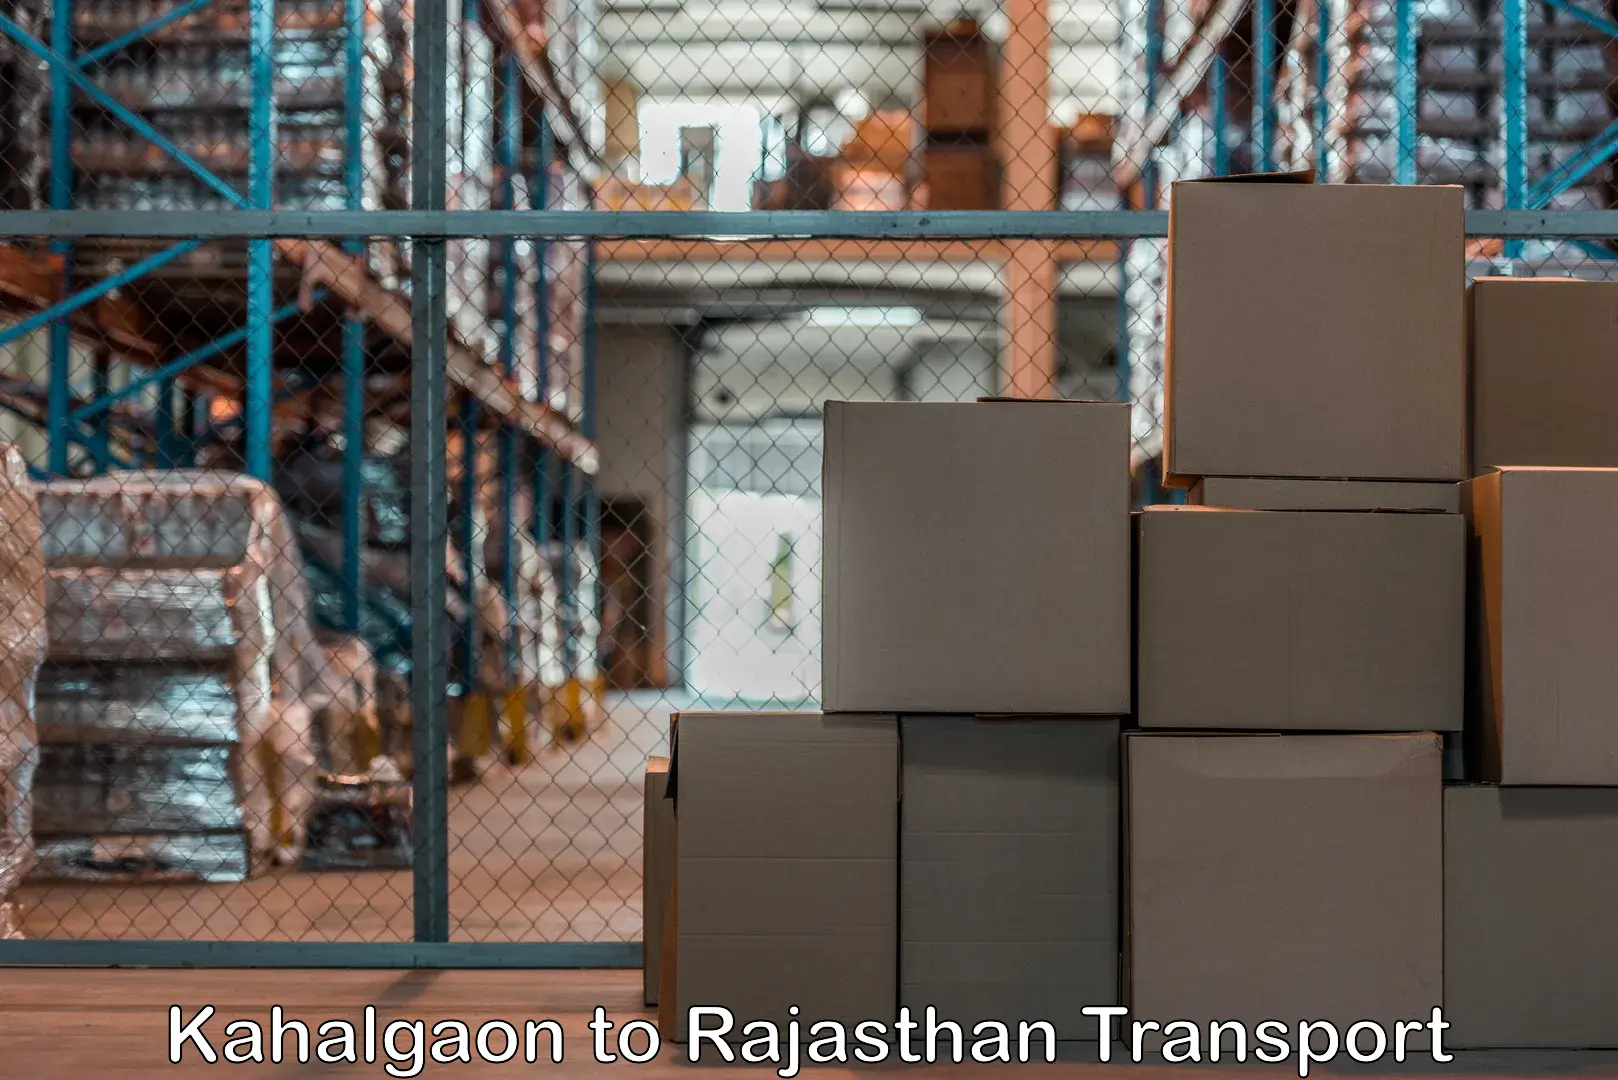 Truck transport companies in India Kahalgaon to Lalsot